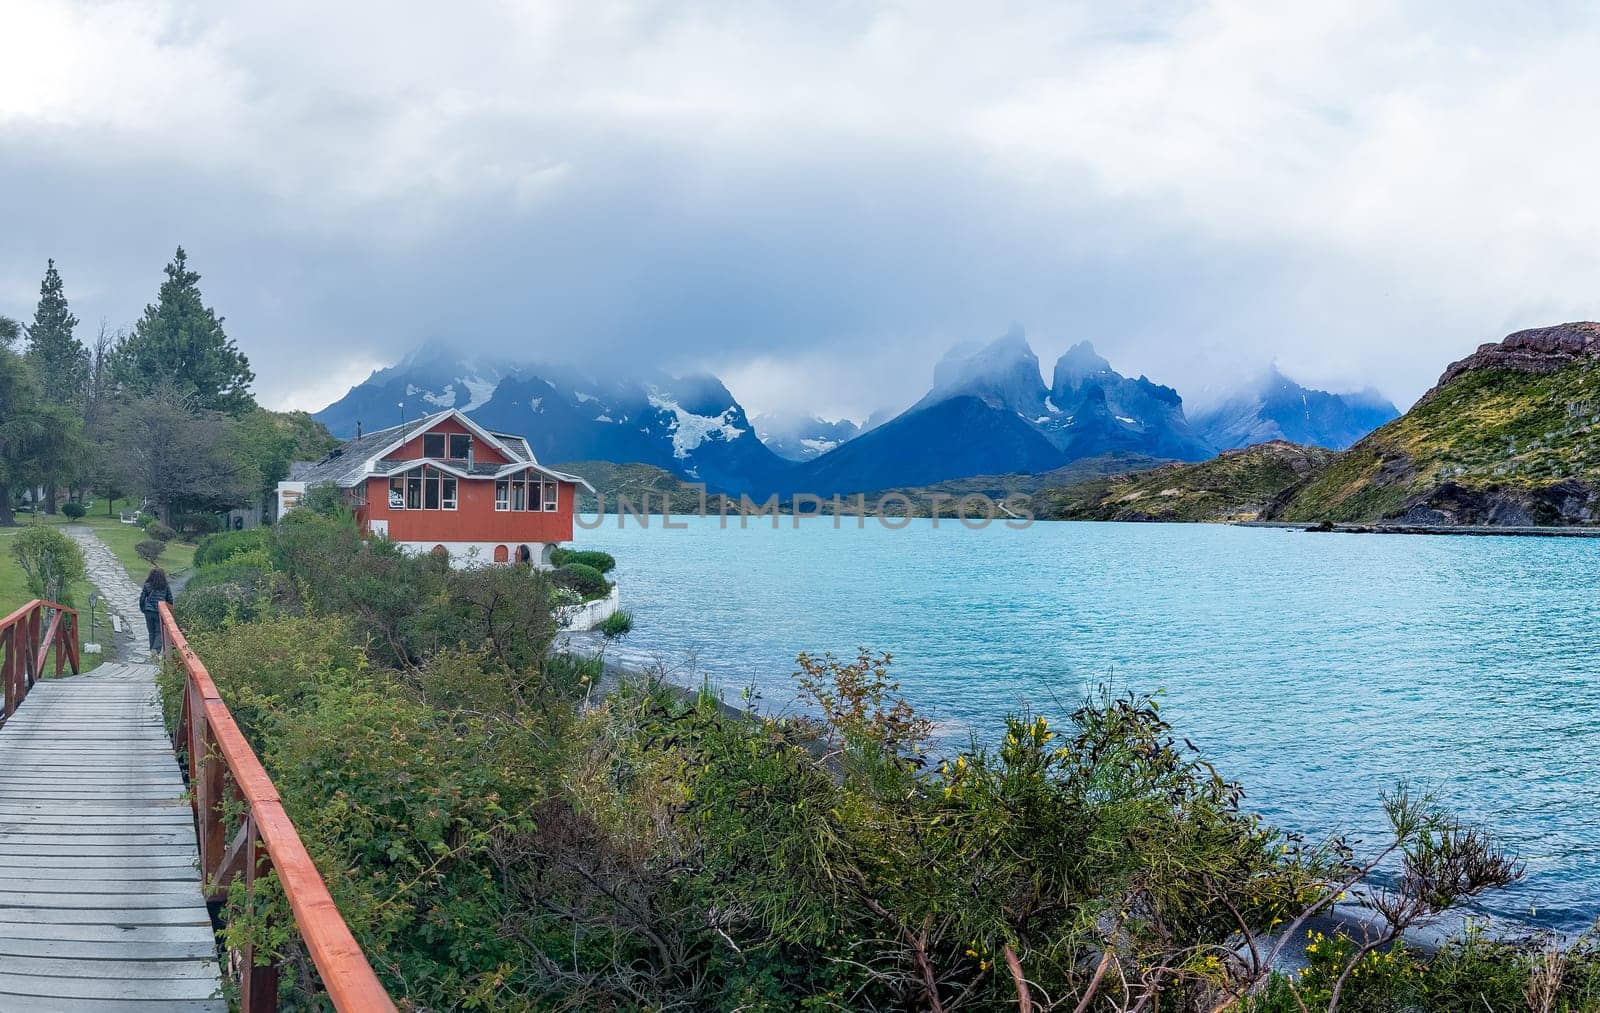 A striking red house by a turquoise lake with misty mountains.